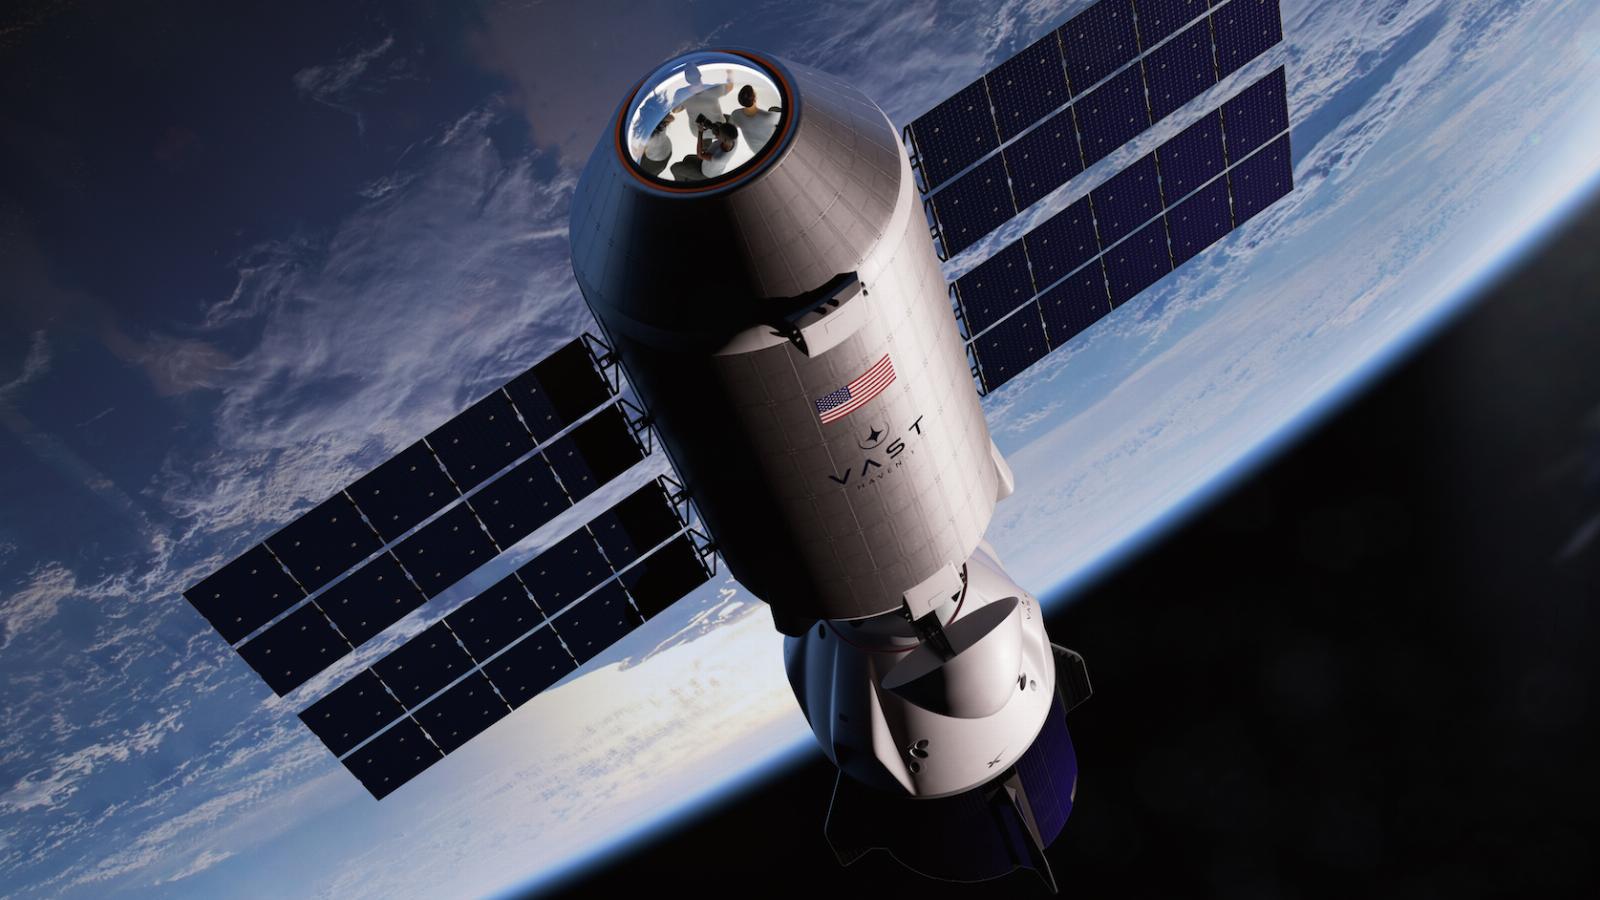 Vast and SpaceX aim to put the first commercial space station in orbit in 2025